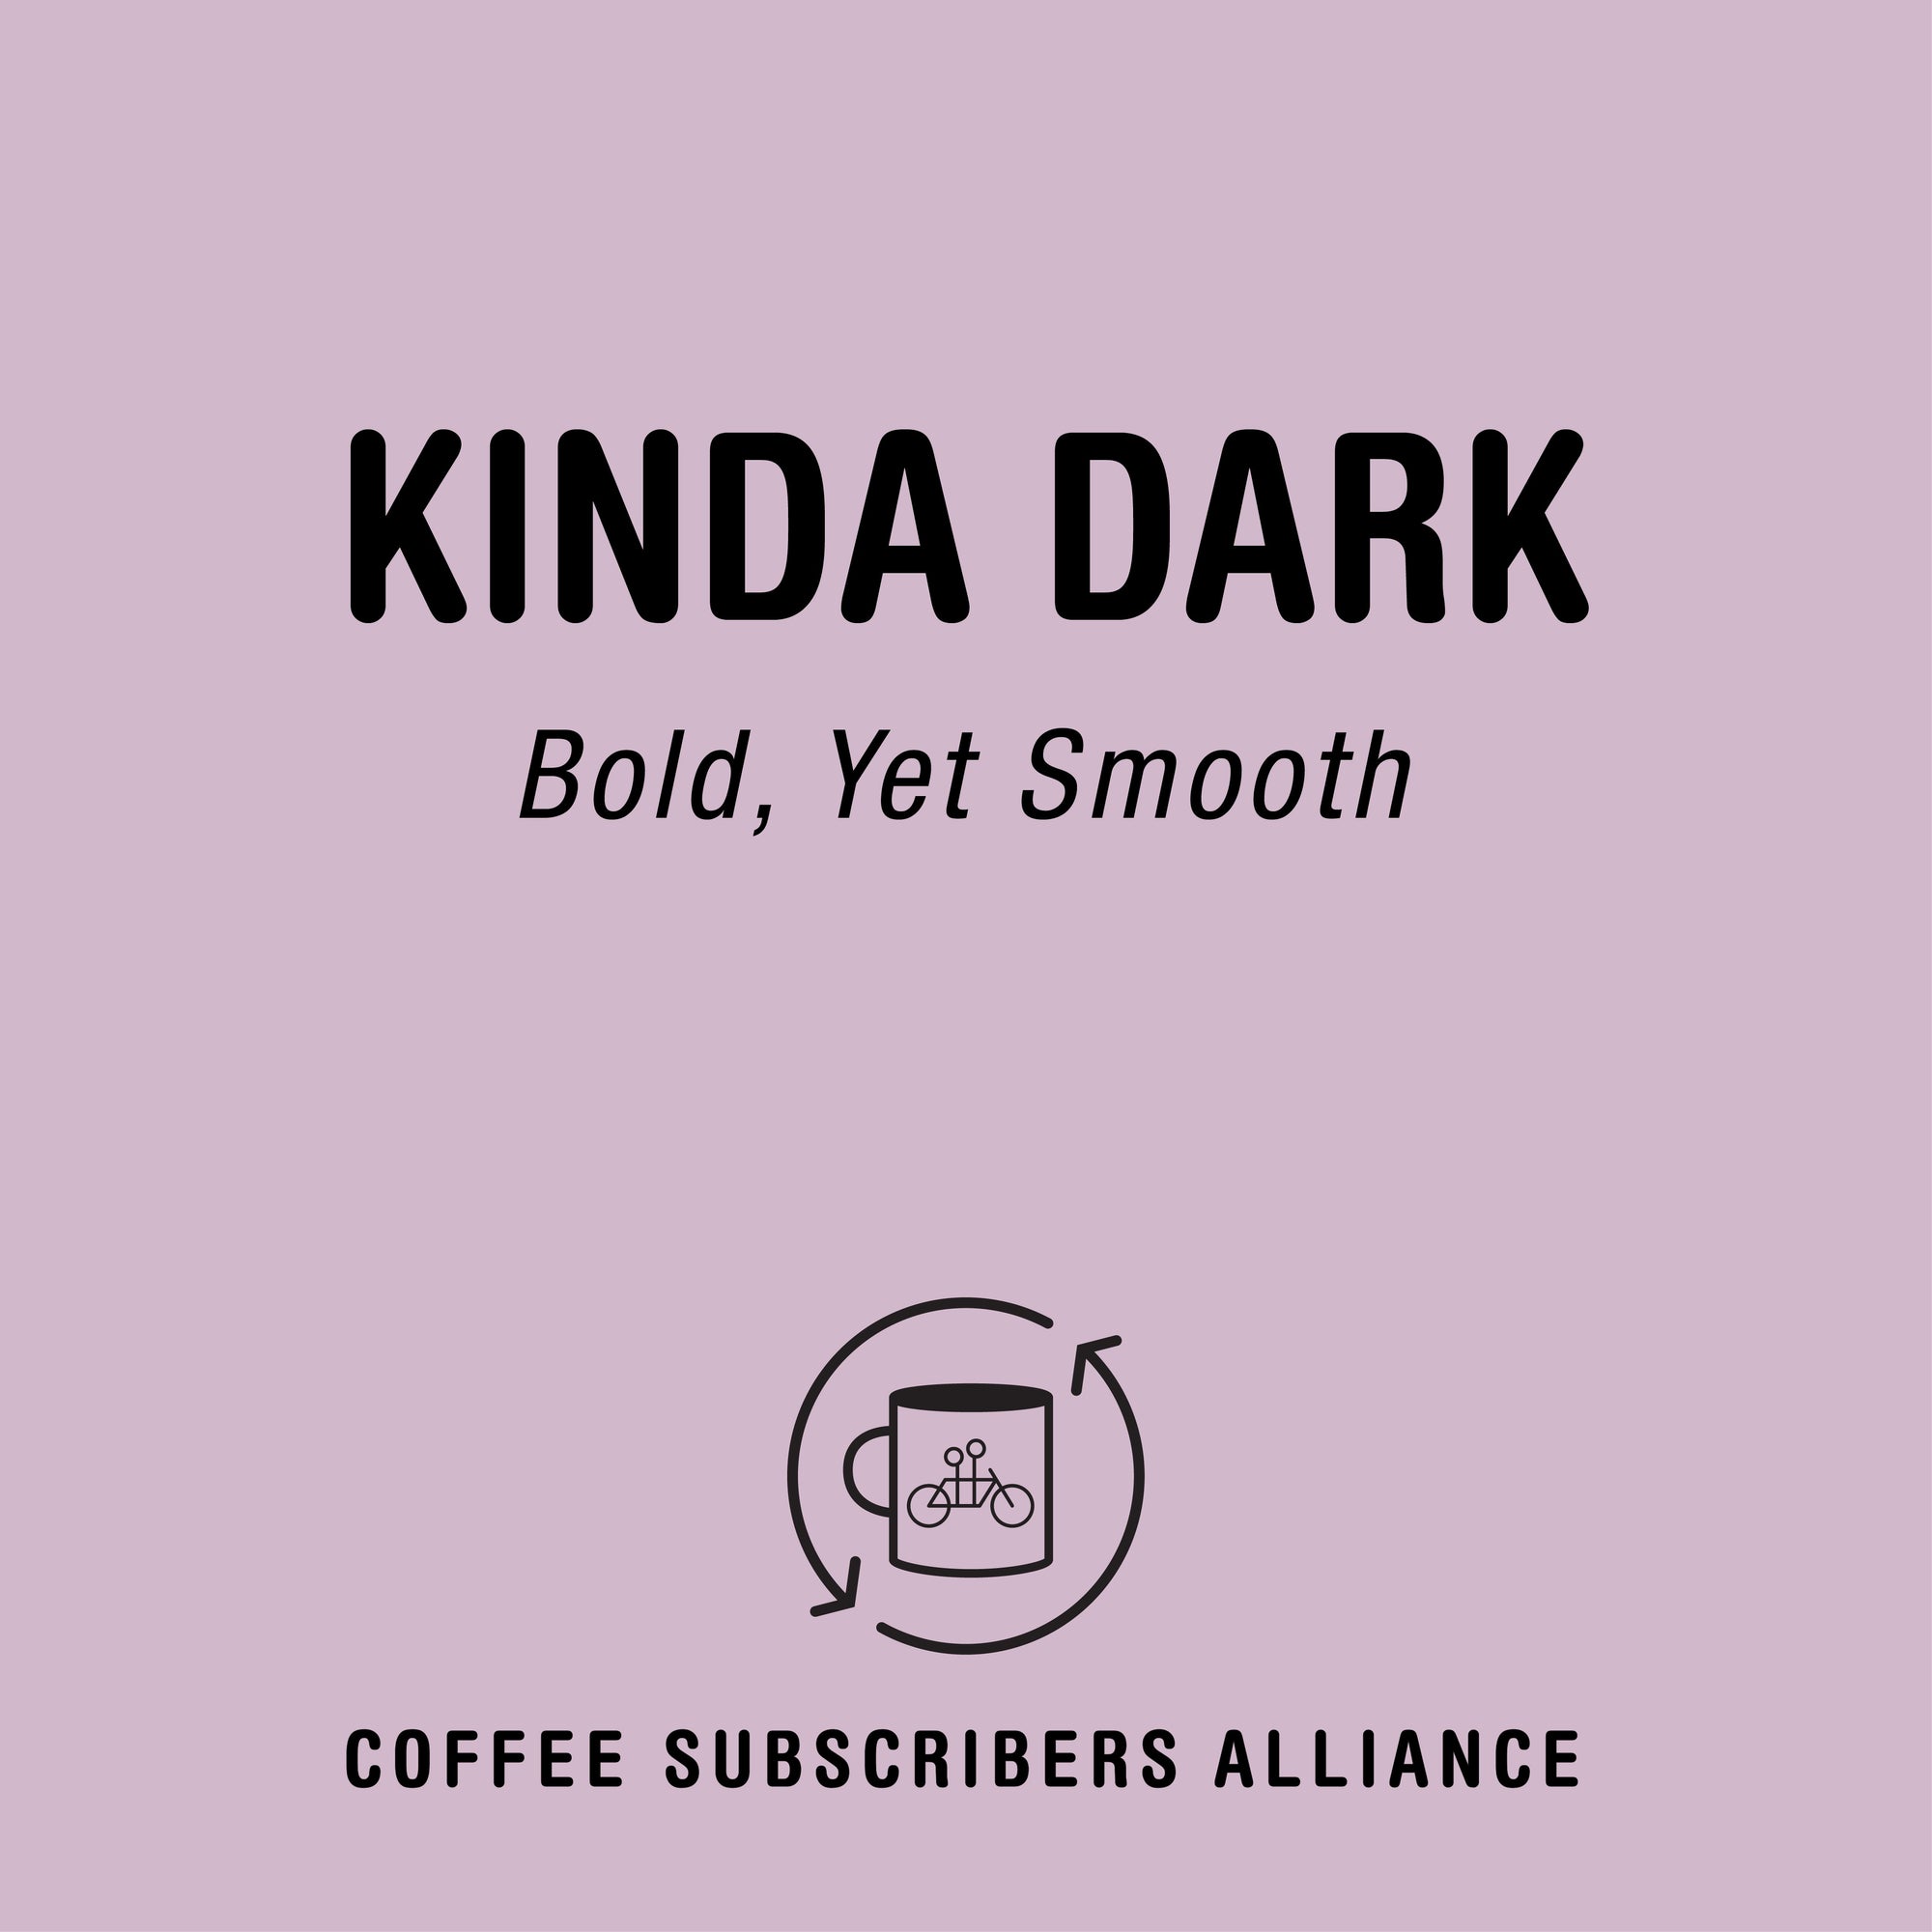 An advertisement for the "Kinda Dark Subscription Gift - 8 Weeks x 6," described as "bold, yet smooth," from Tandem. The ad features a simple logo with two coffee mugs clinking. The background.